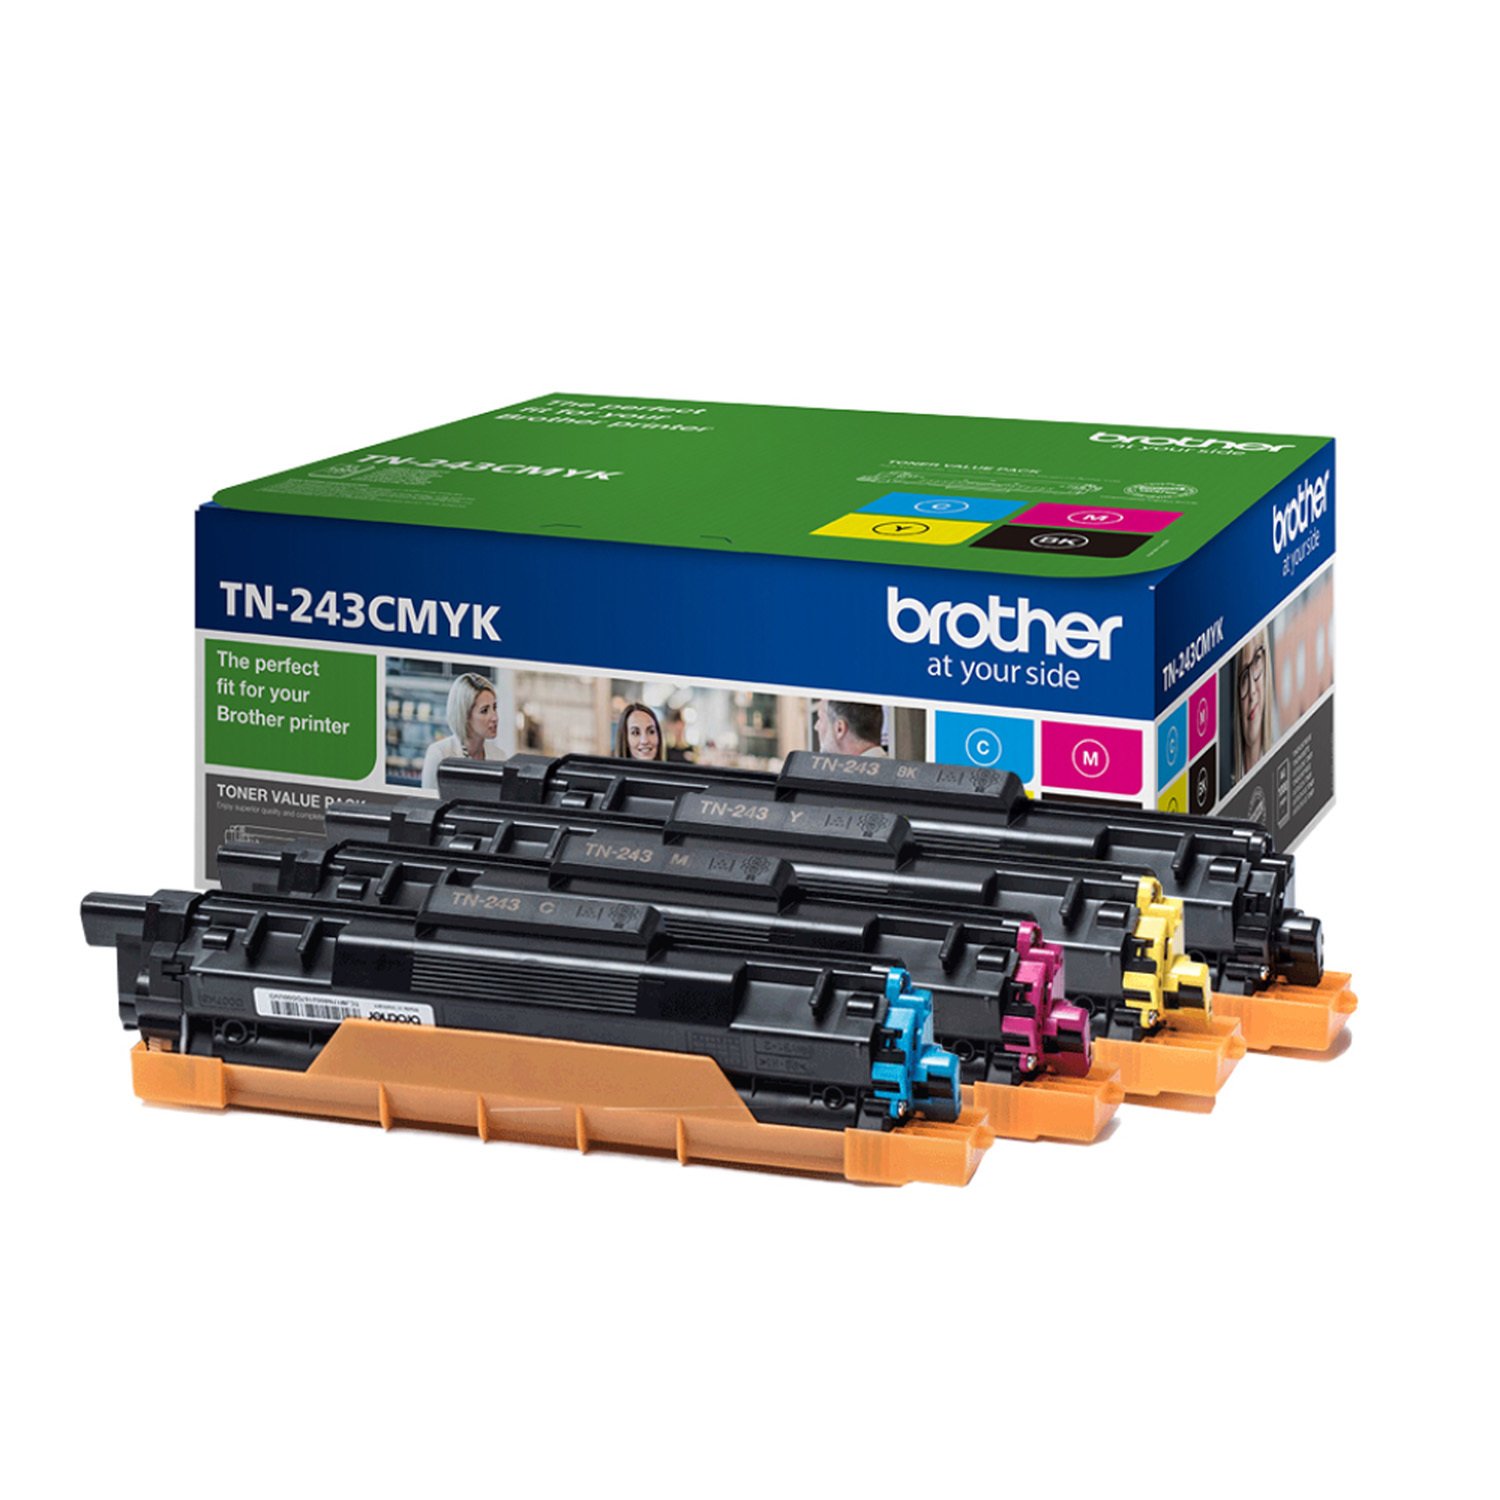 Brother TN243 Toner Cartridges Review